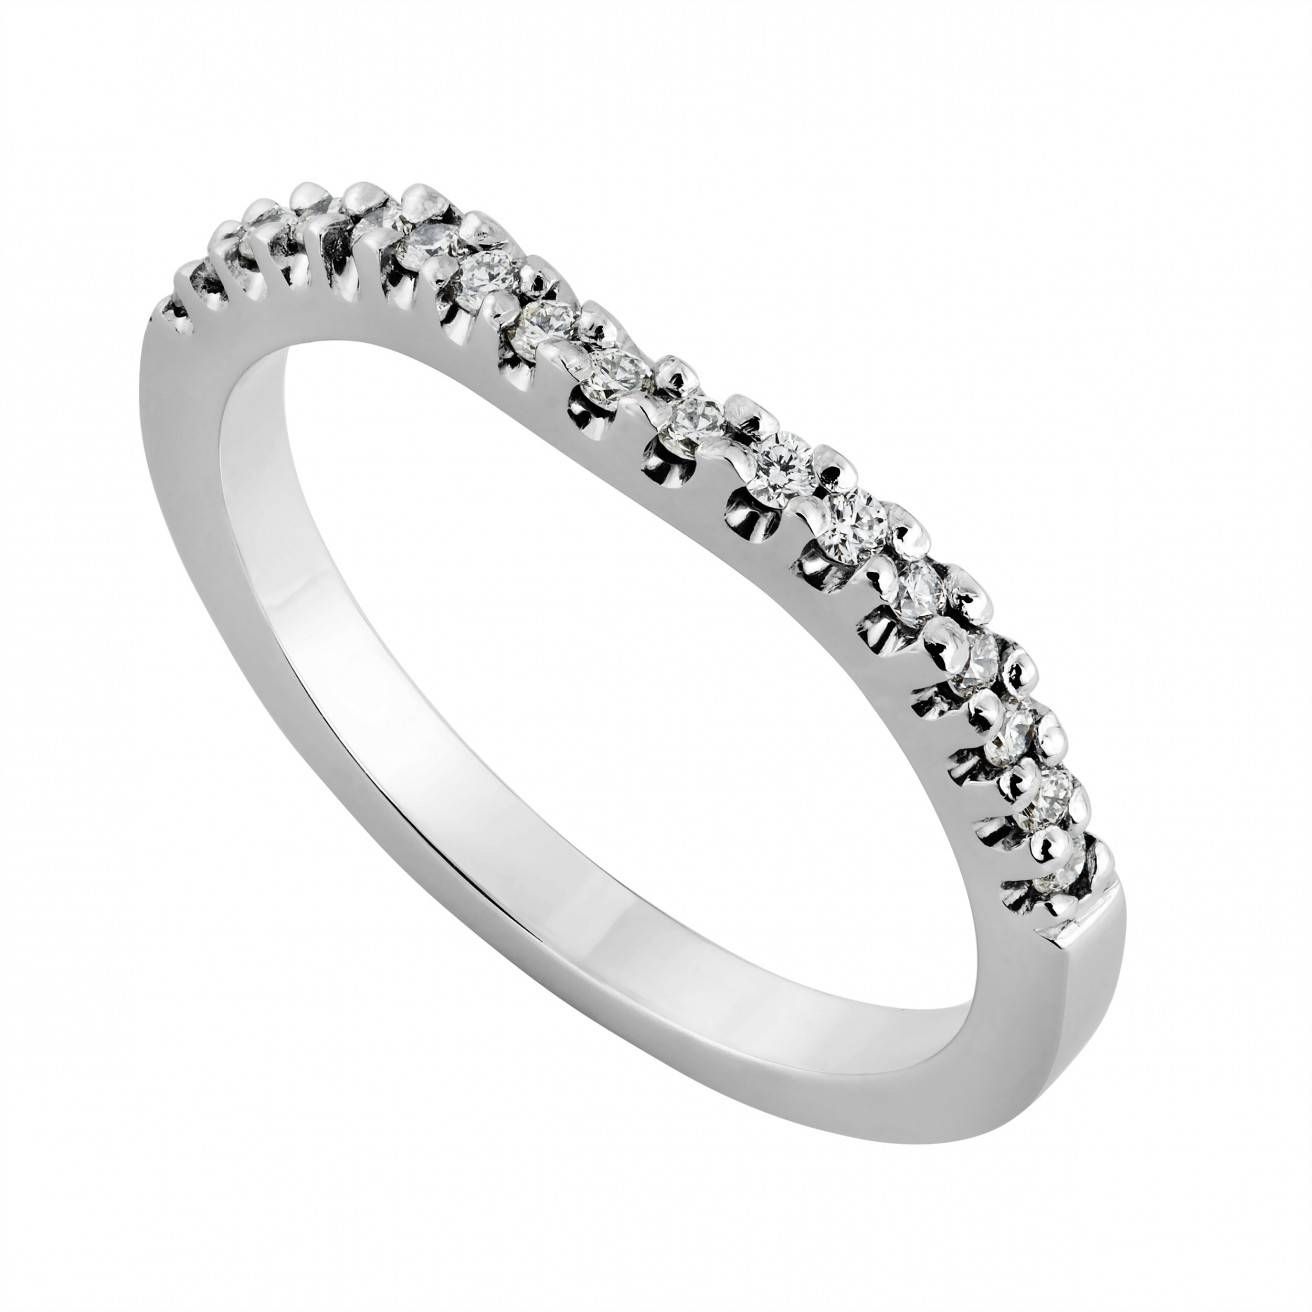 Buy A Diamond Wedding Ring – Fraser Hart Throughout Most Up To Date Platinum Wedding Bands For Women (View 13 of 15)